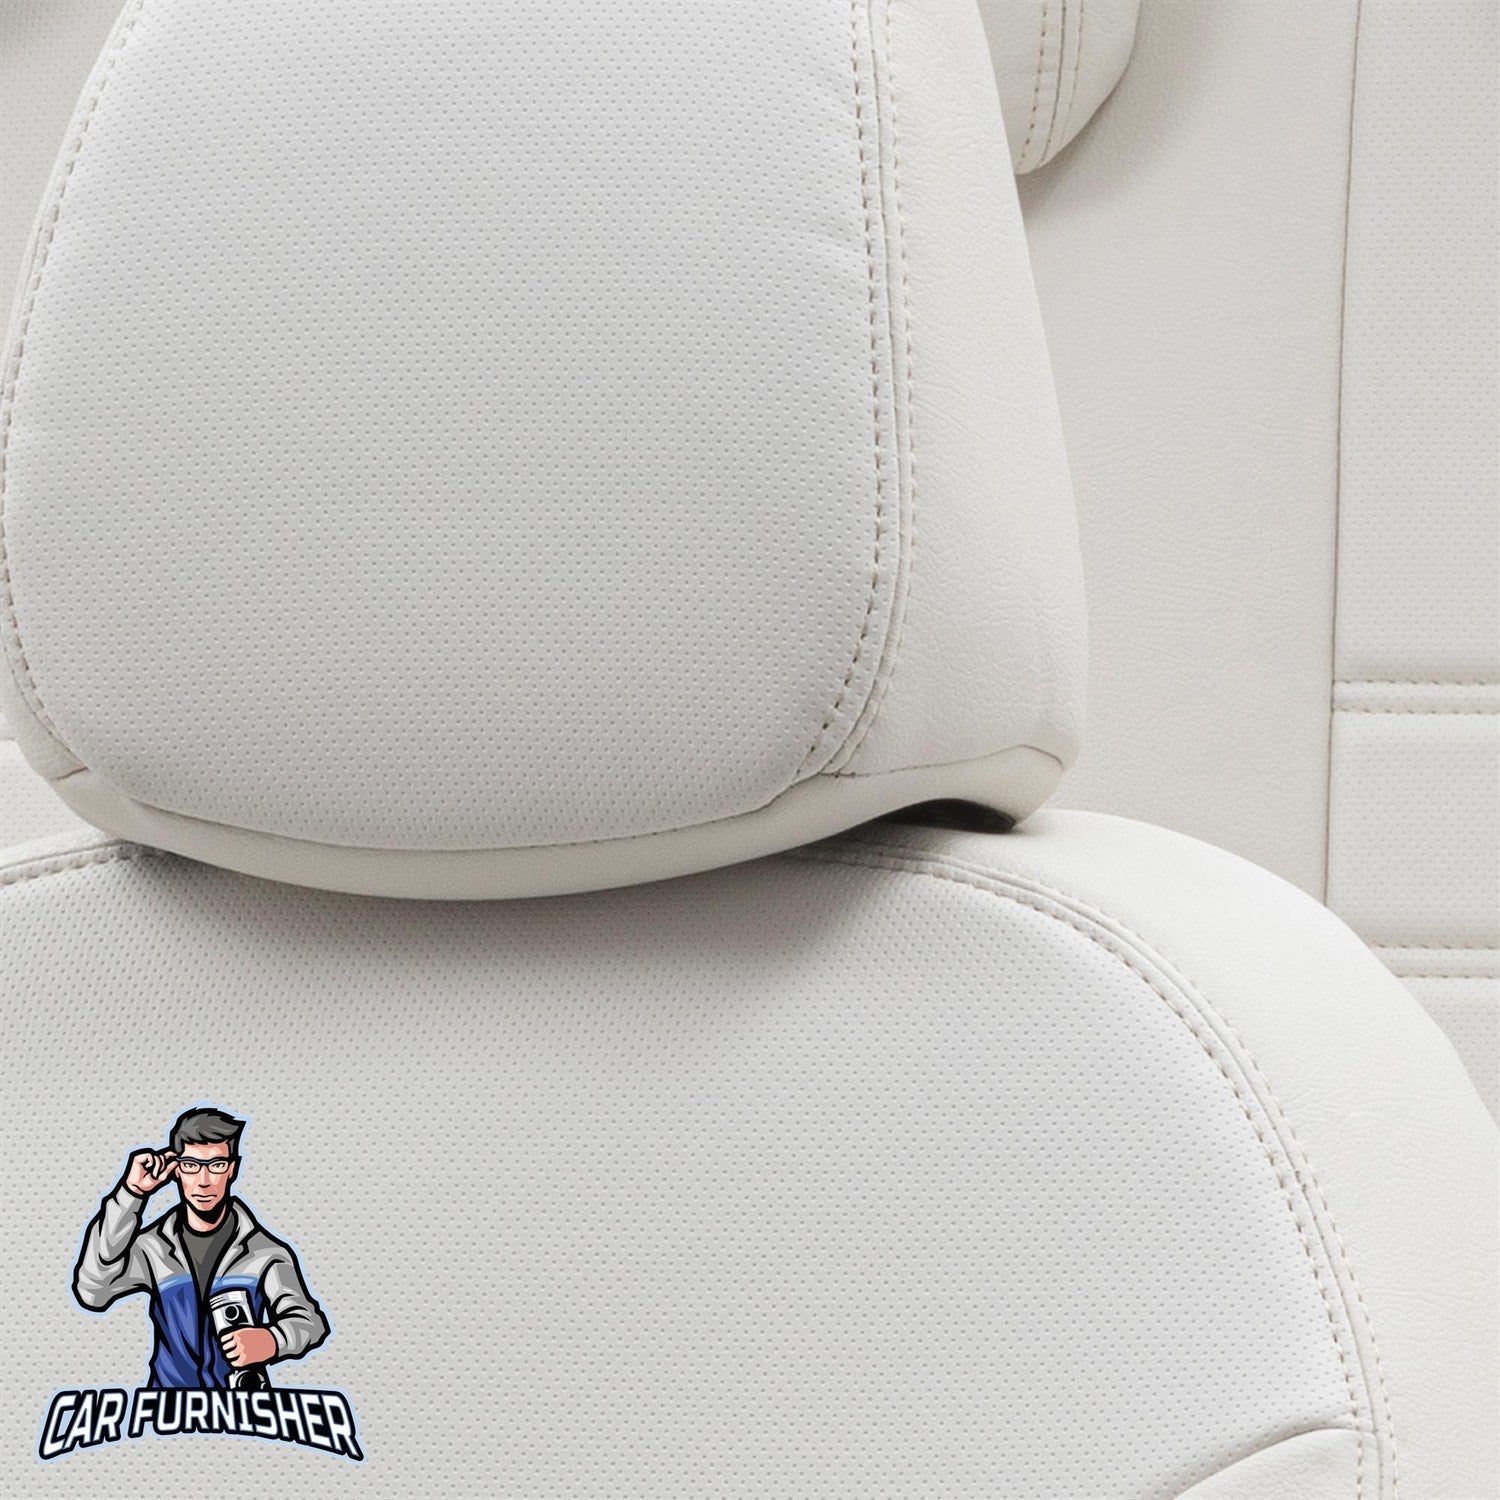 Mini Clubman Car Seat Covers 2015-2023 Istanbul Design Ivory Full Set (5 Seats + Handrest) Leather & Fabric